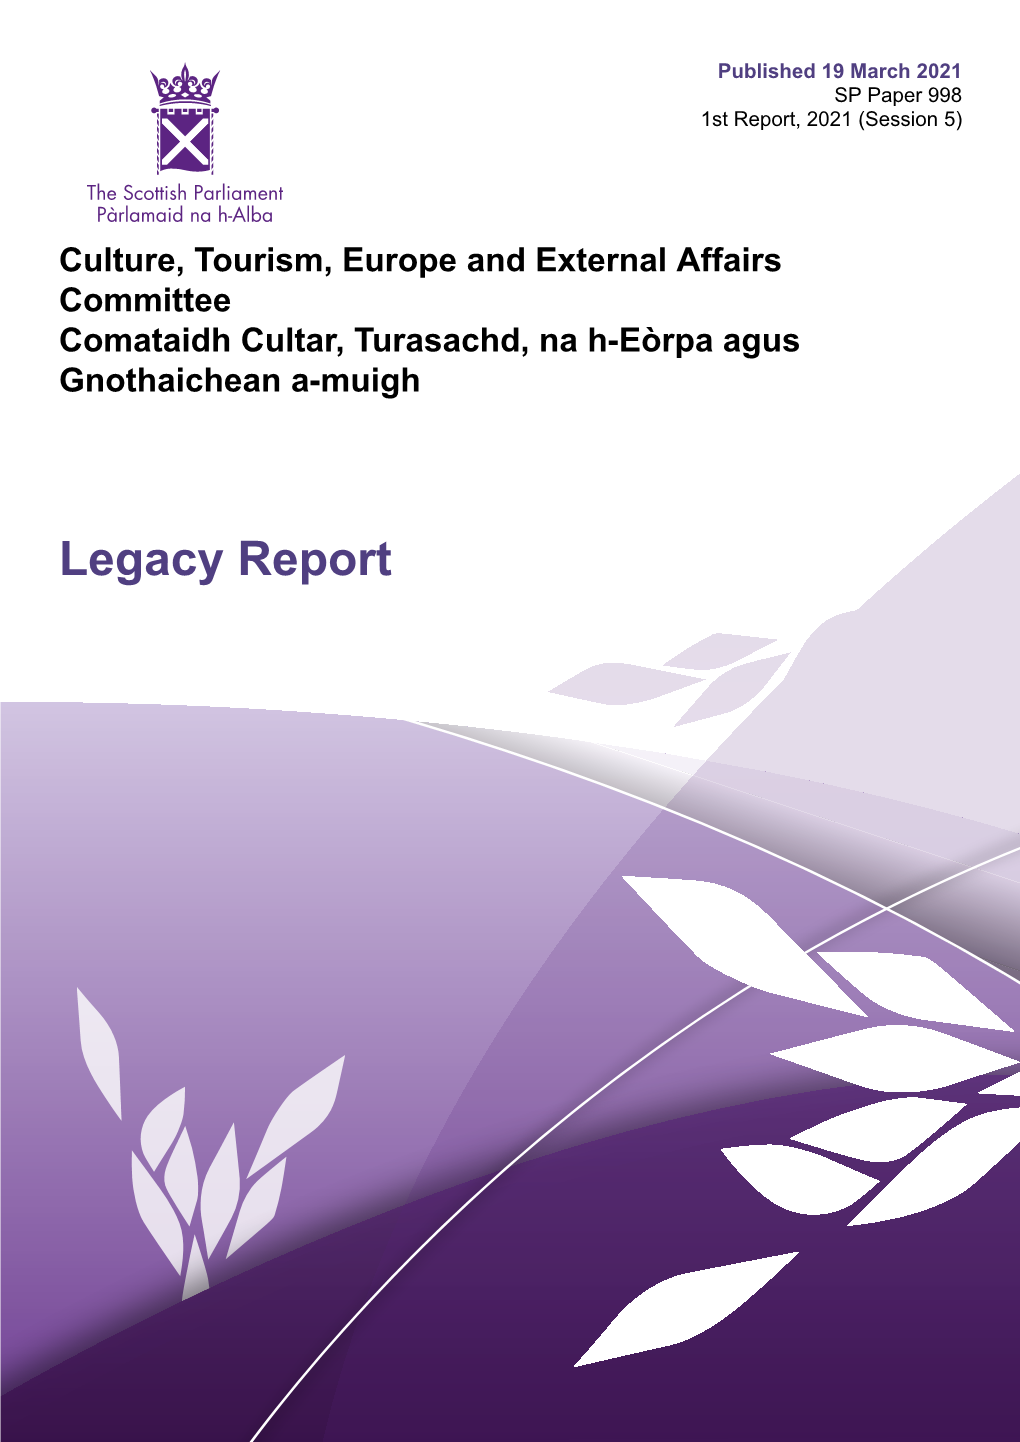 Legacy Report Published in Scotland by the Scottish Parliamentary Corporate Body